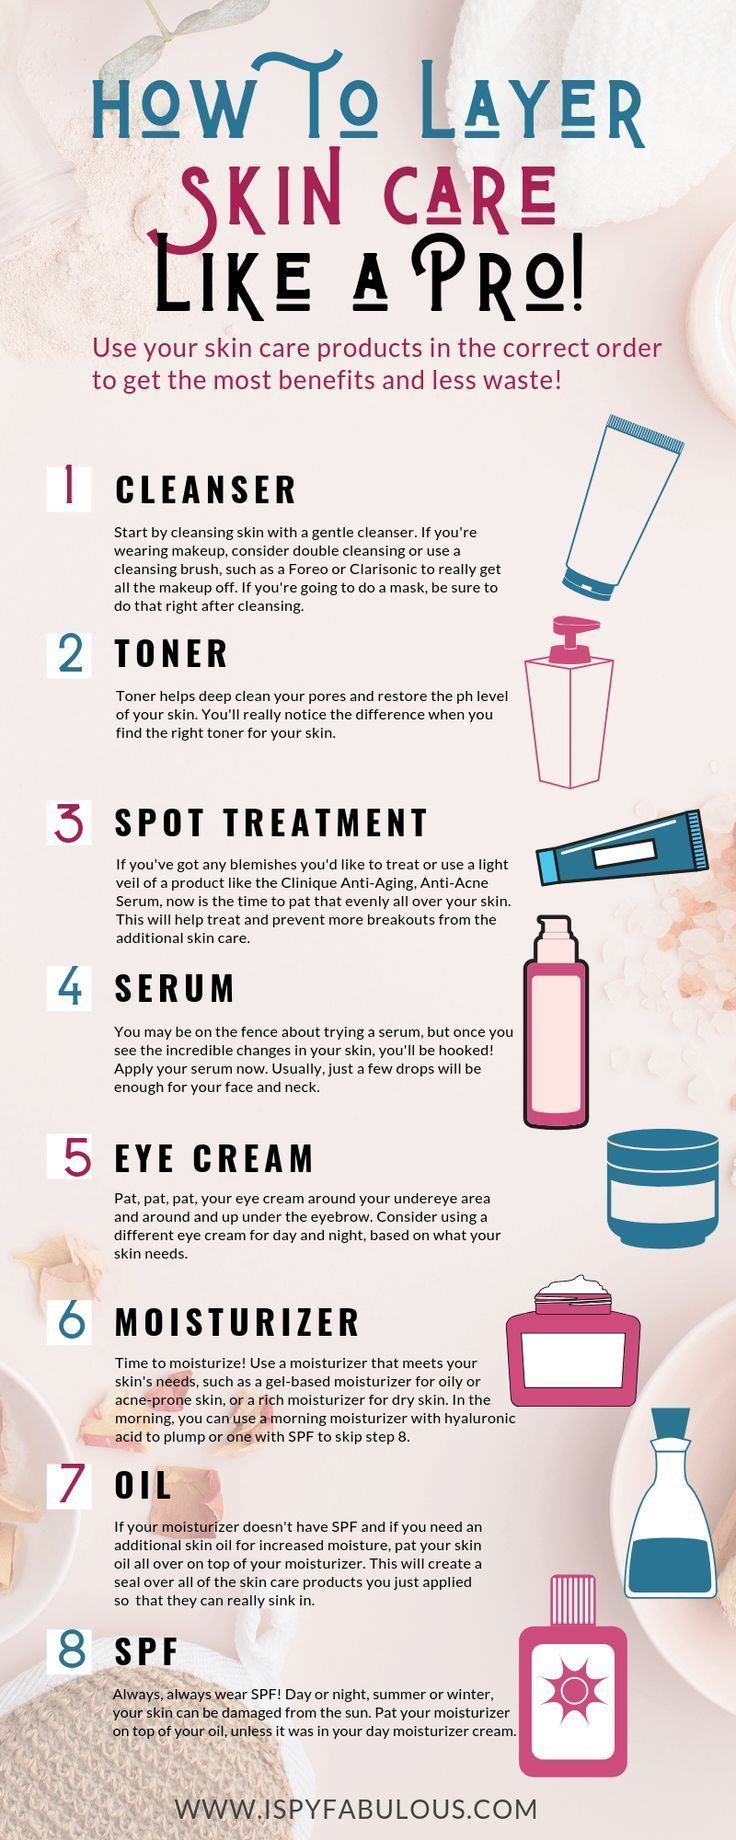 How To Layer Your Skin Care Like a Pro! -   19 beauty Tips products ideas